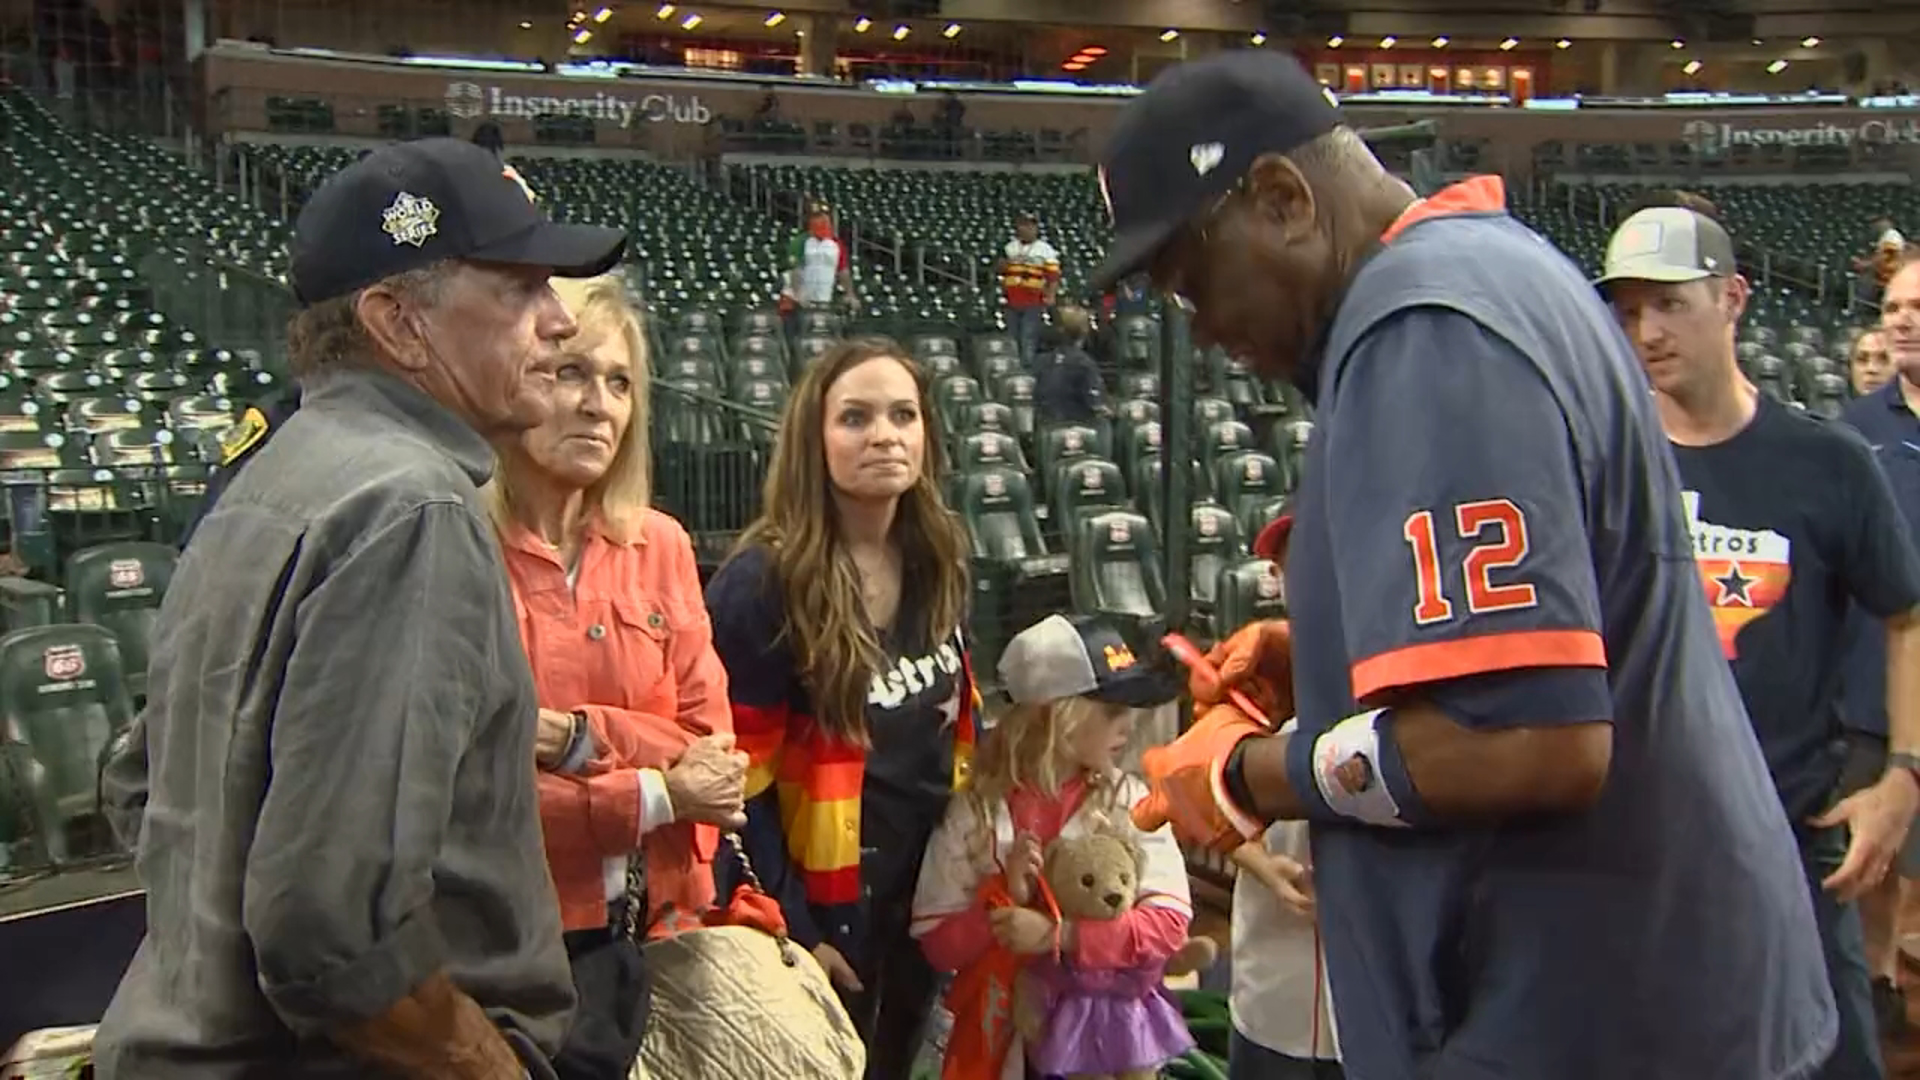 The country music legend also shared a moment with Astros manager Dusty Baker. The two chatted for a bit as the skipper signed an autograph for Strait’s family.